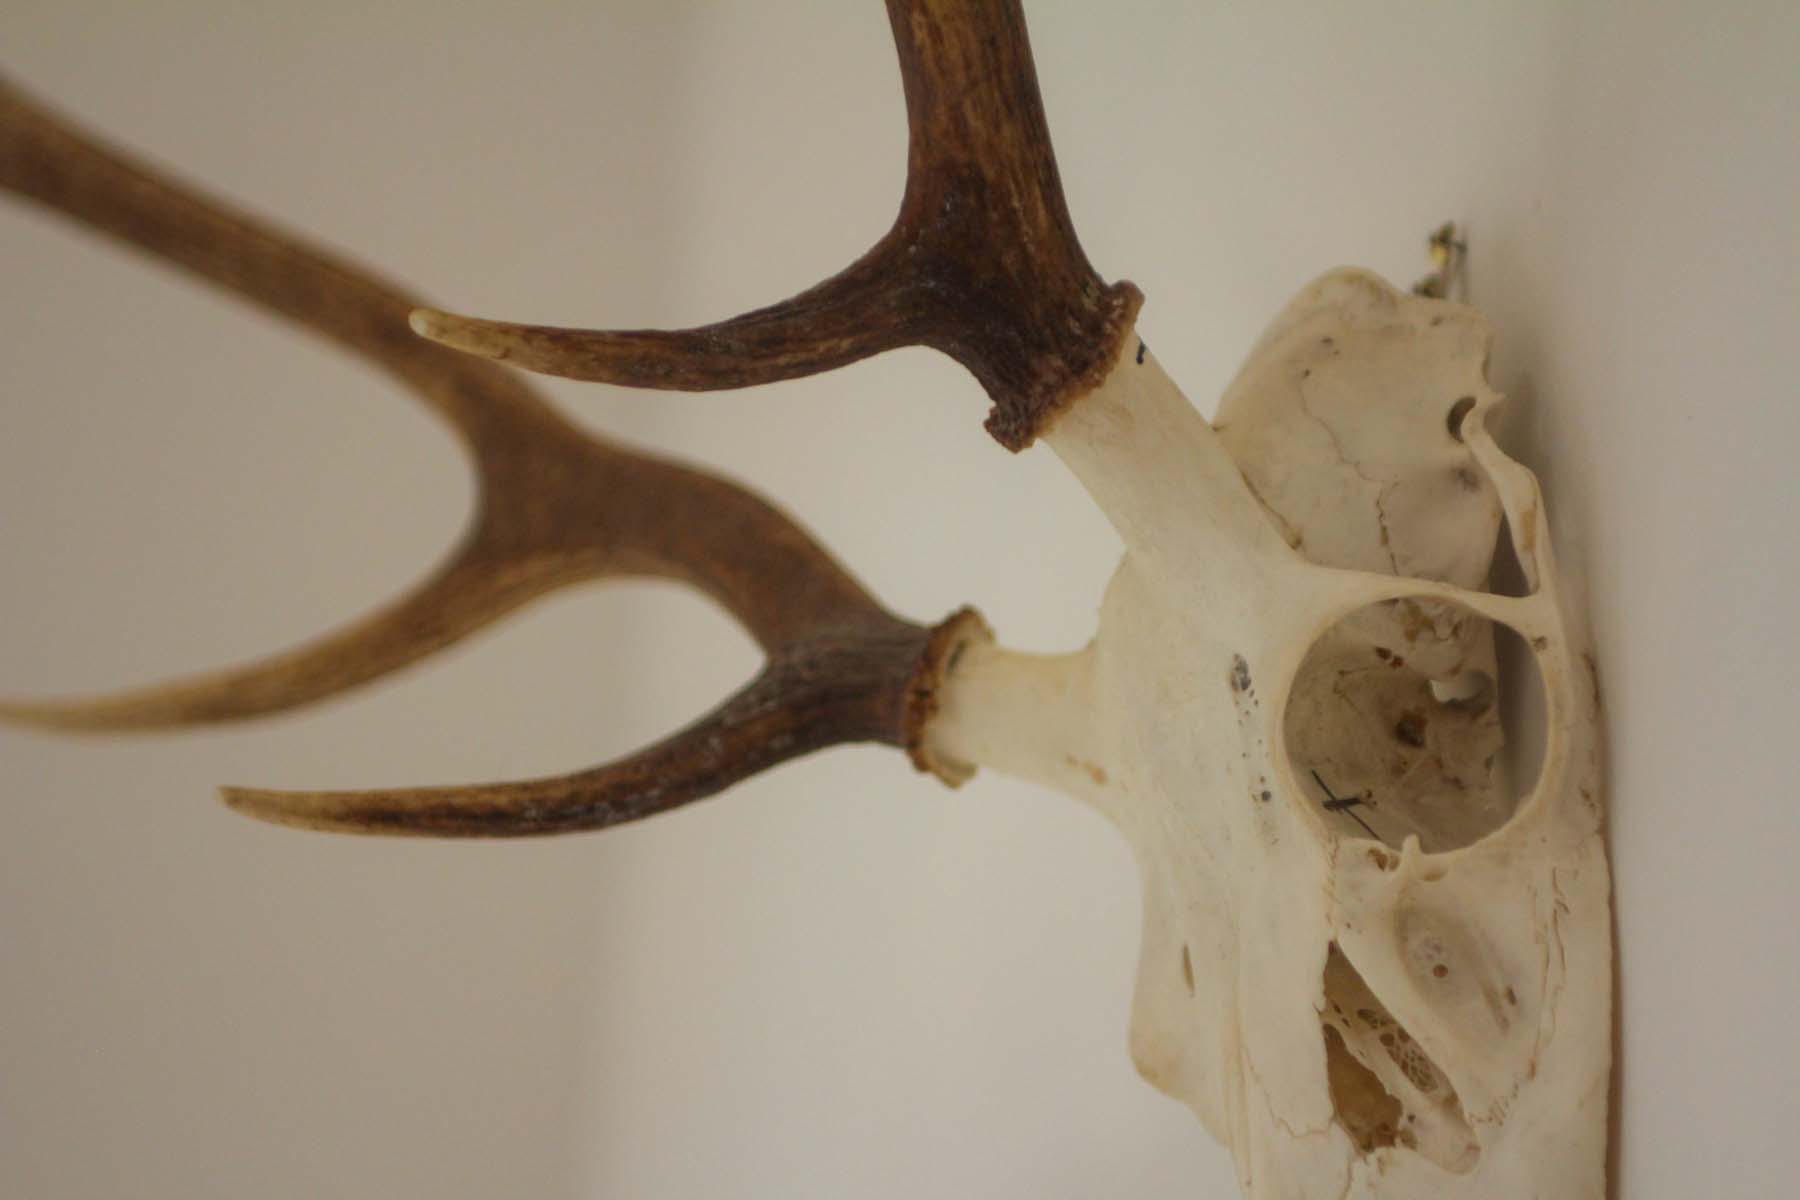 Antlers on the wall